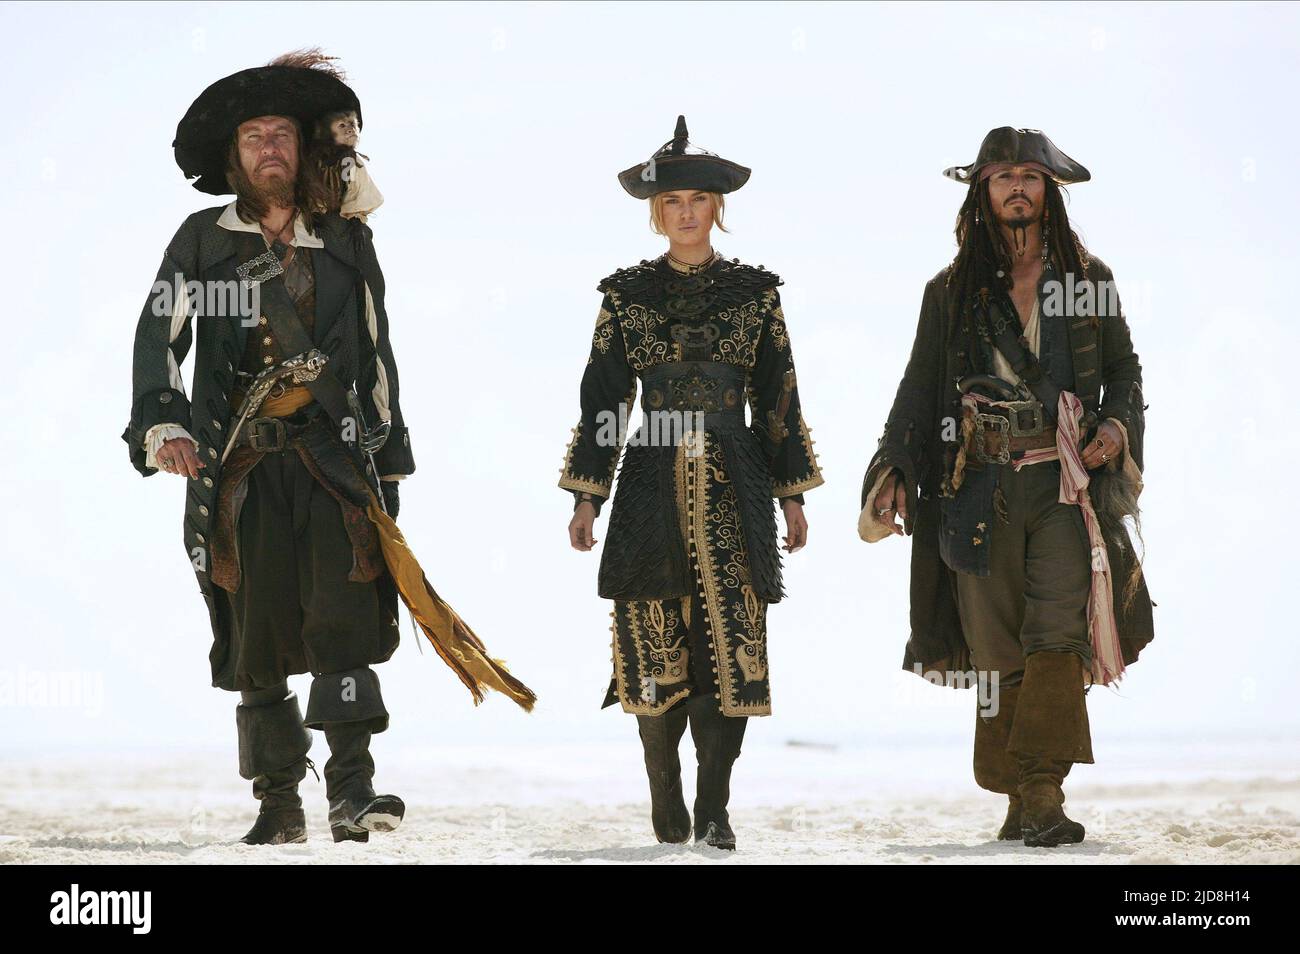 RUSH,KNIGHTLEY,DEPP, PIRATES OF THE CARIBBEAN: AT WORLD'S END, 2007, Stock Photo